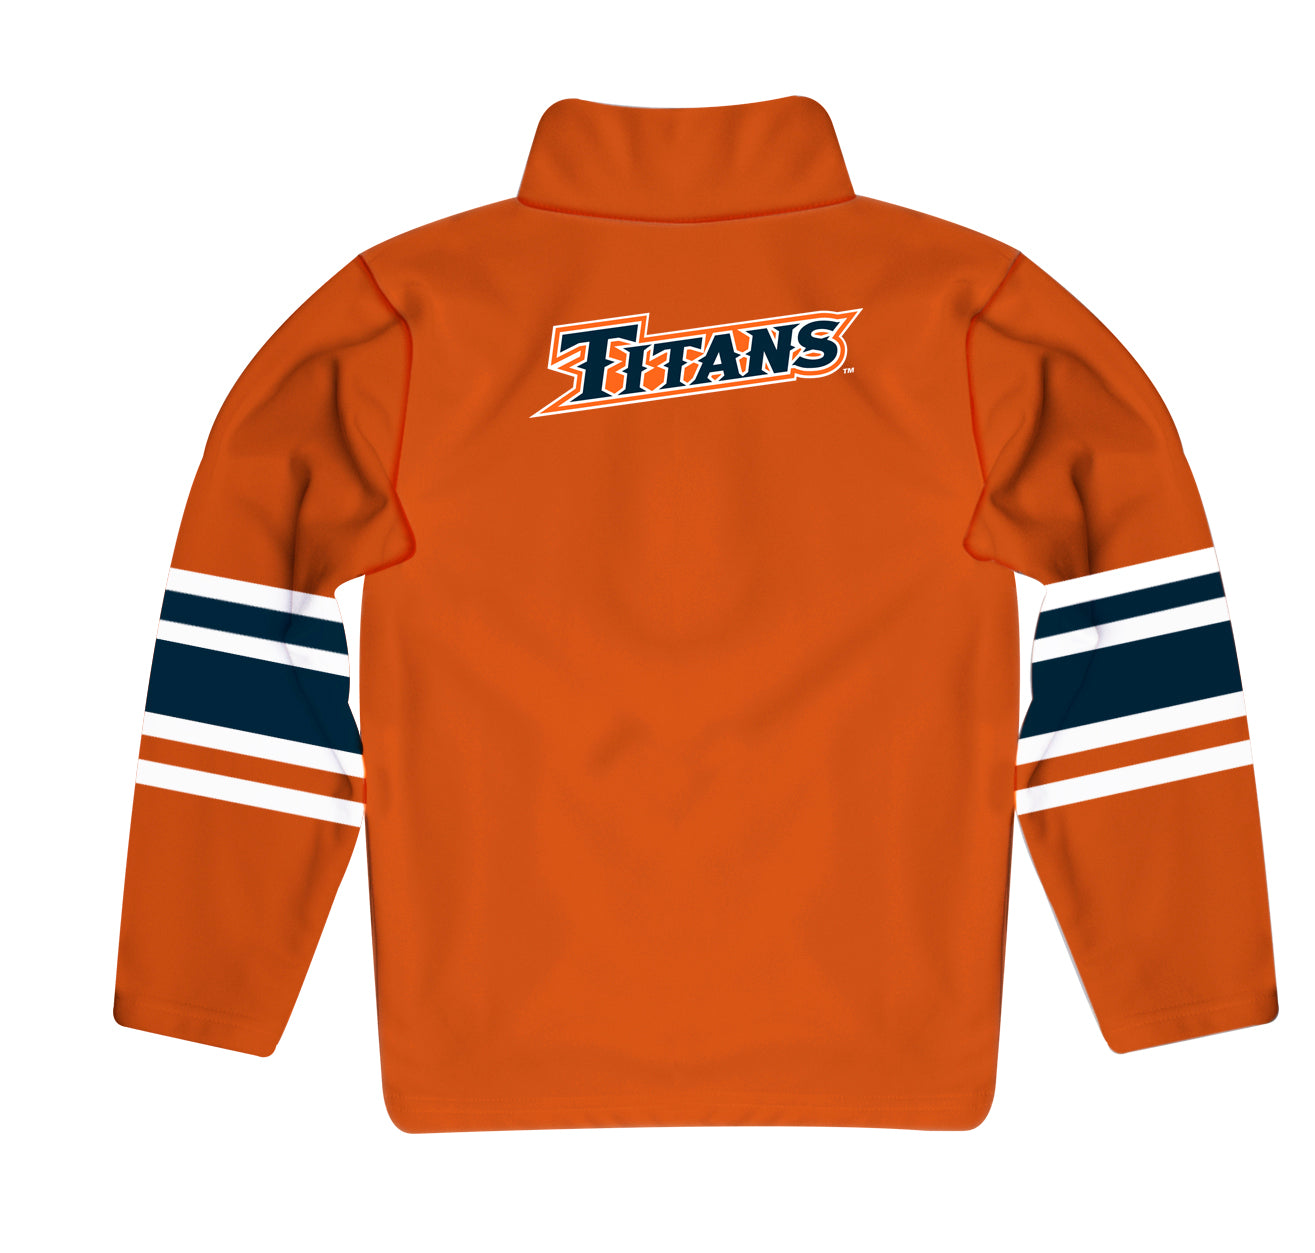 Cal State Fullerton Titans CSUF Game Day Orange Quarter Zip Pullover for Infants Toddlers by Vive La Fete